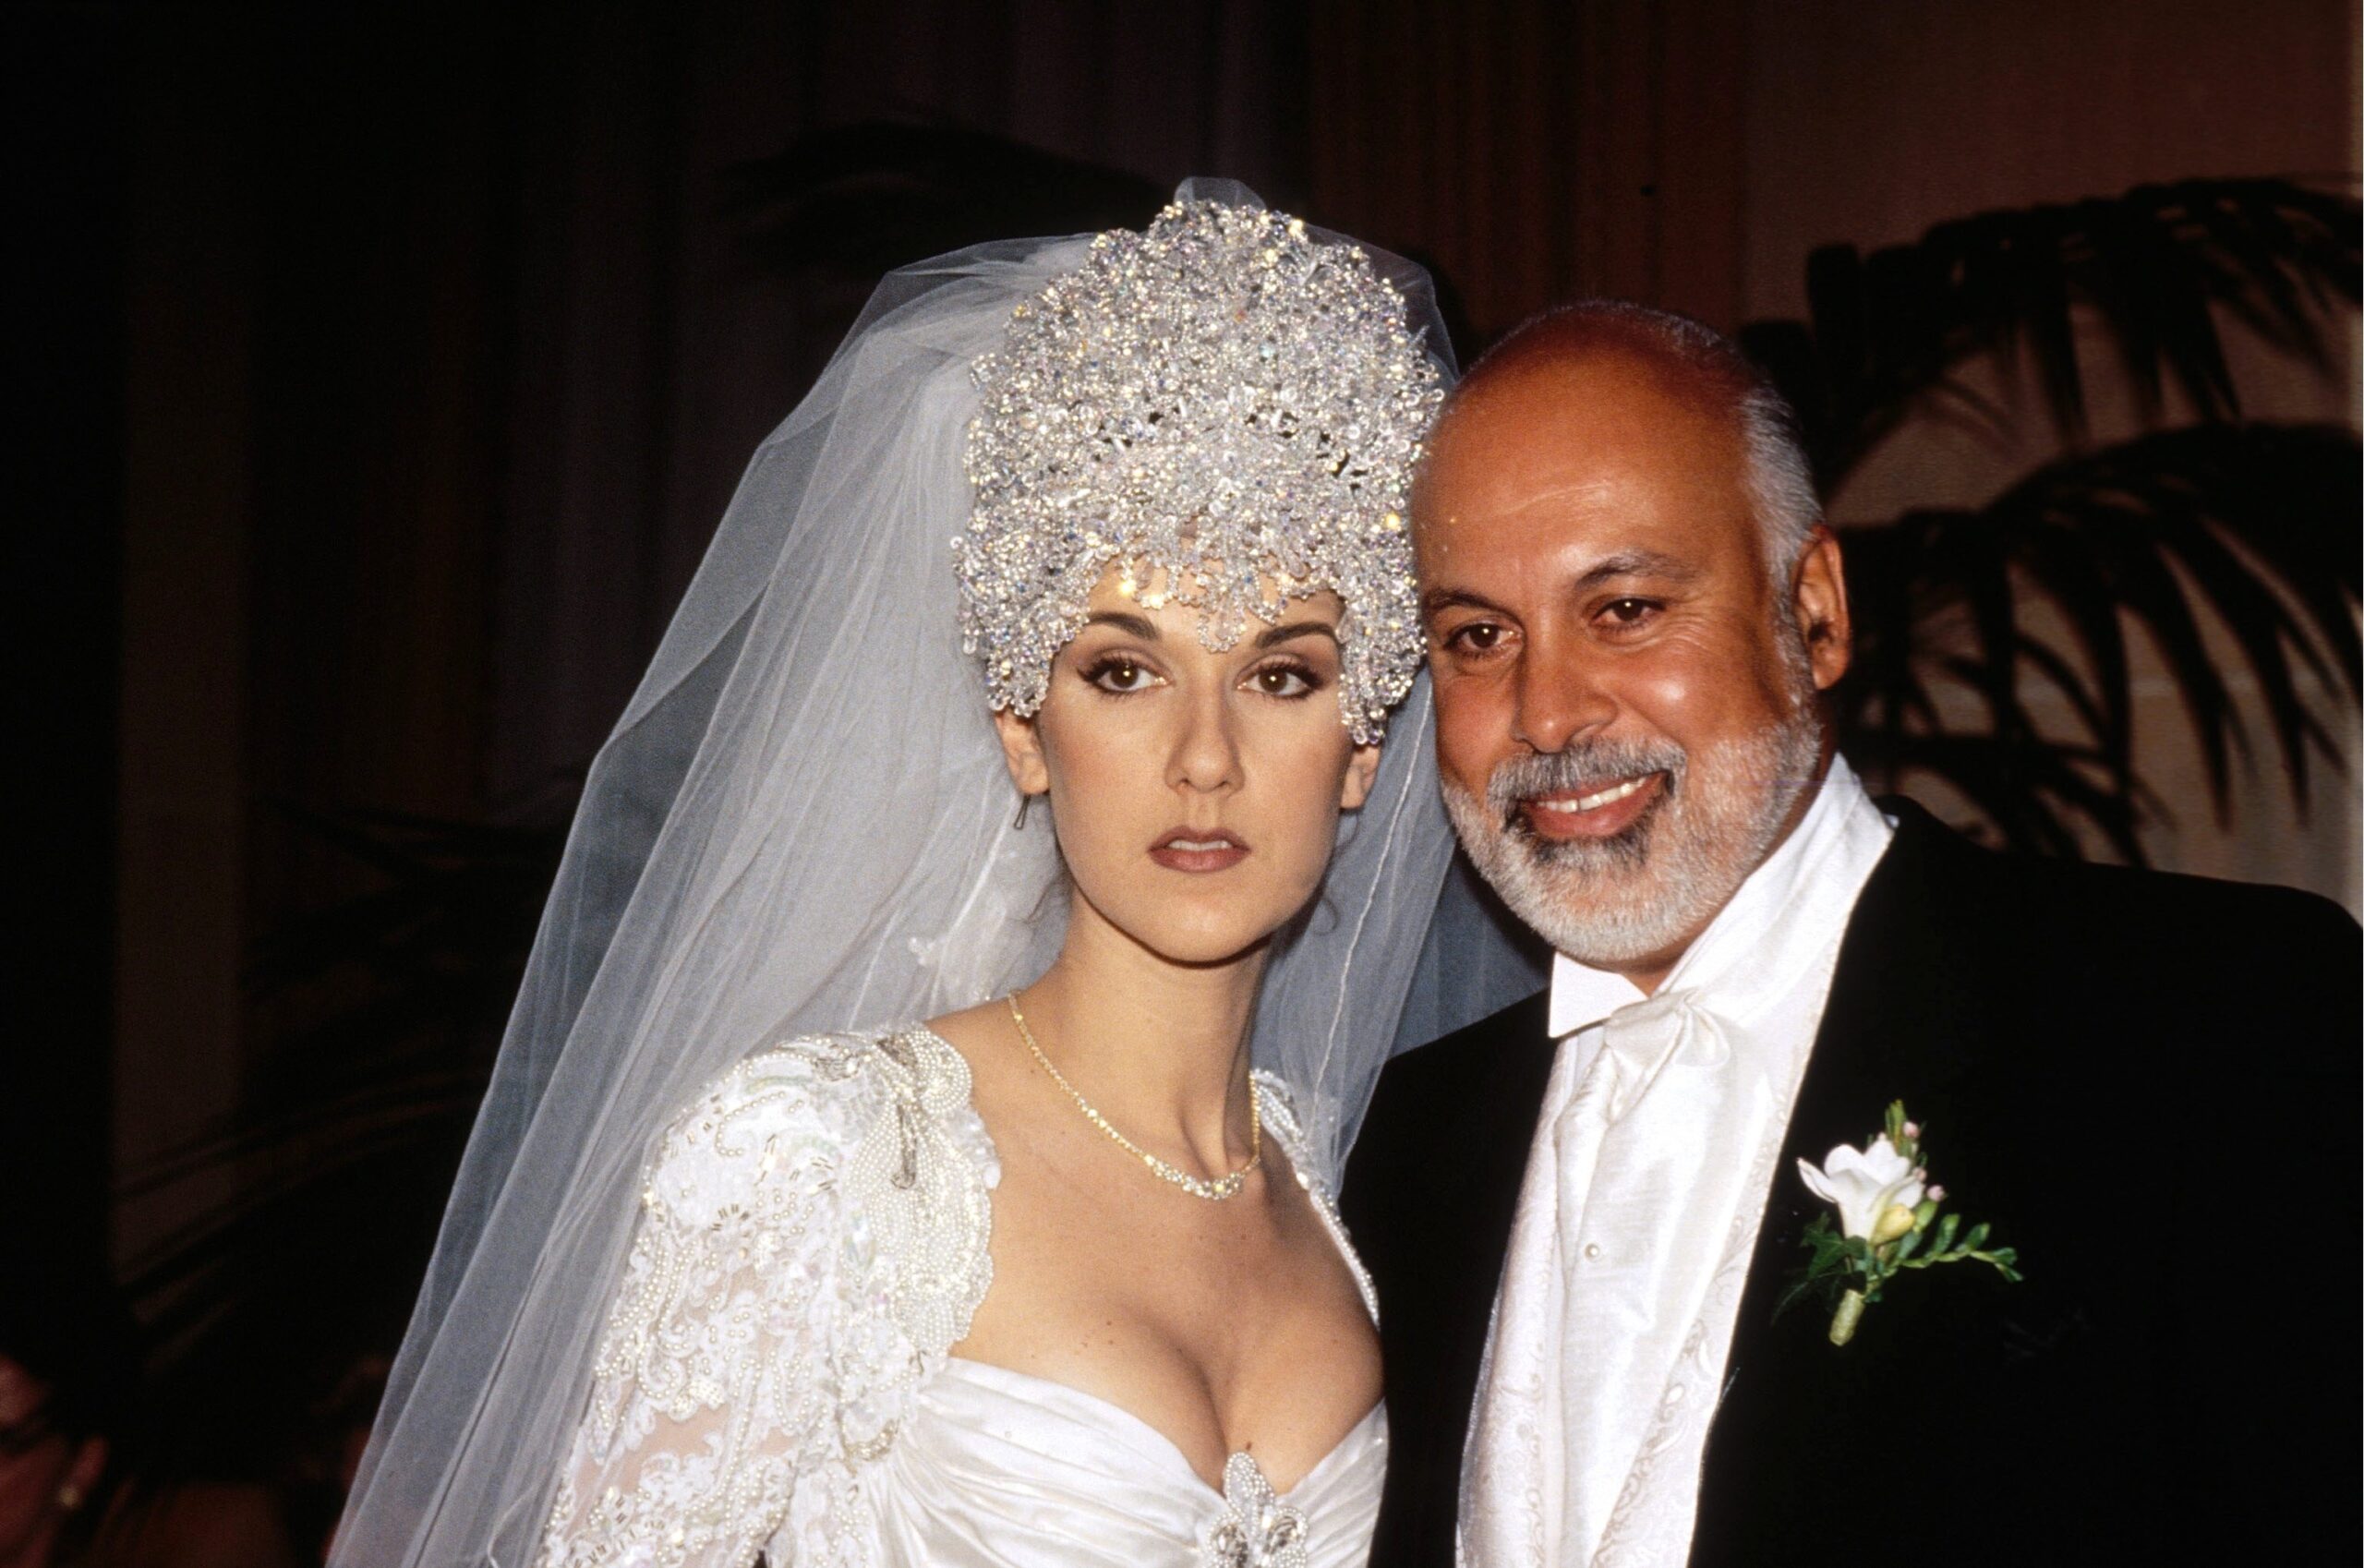 Celine Dion and René Angélil during their wedding in Montreal, Canada on December 17, 1994. | Source: Getty Images